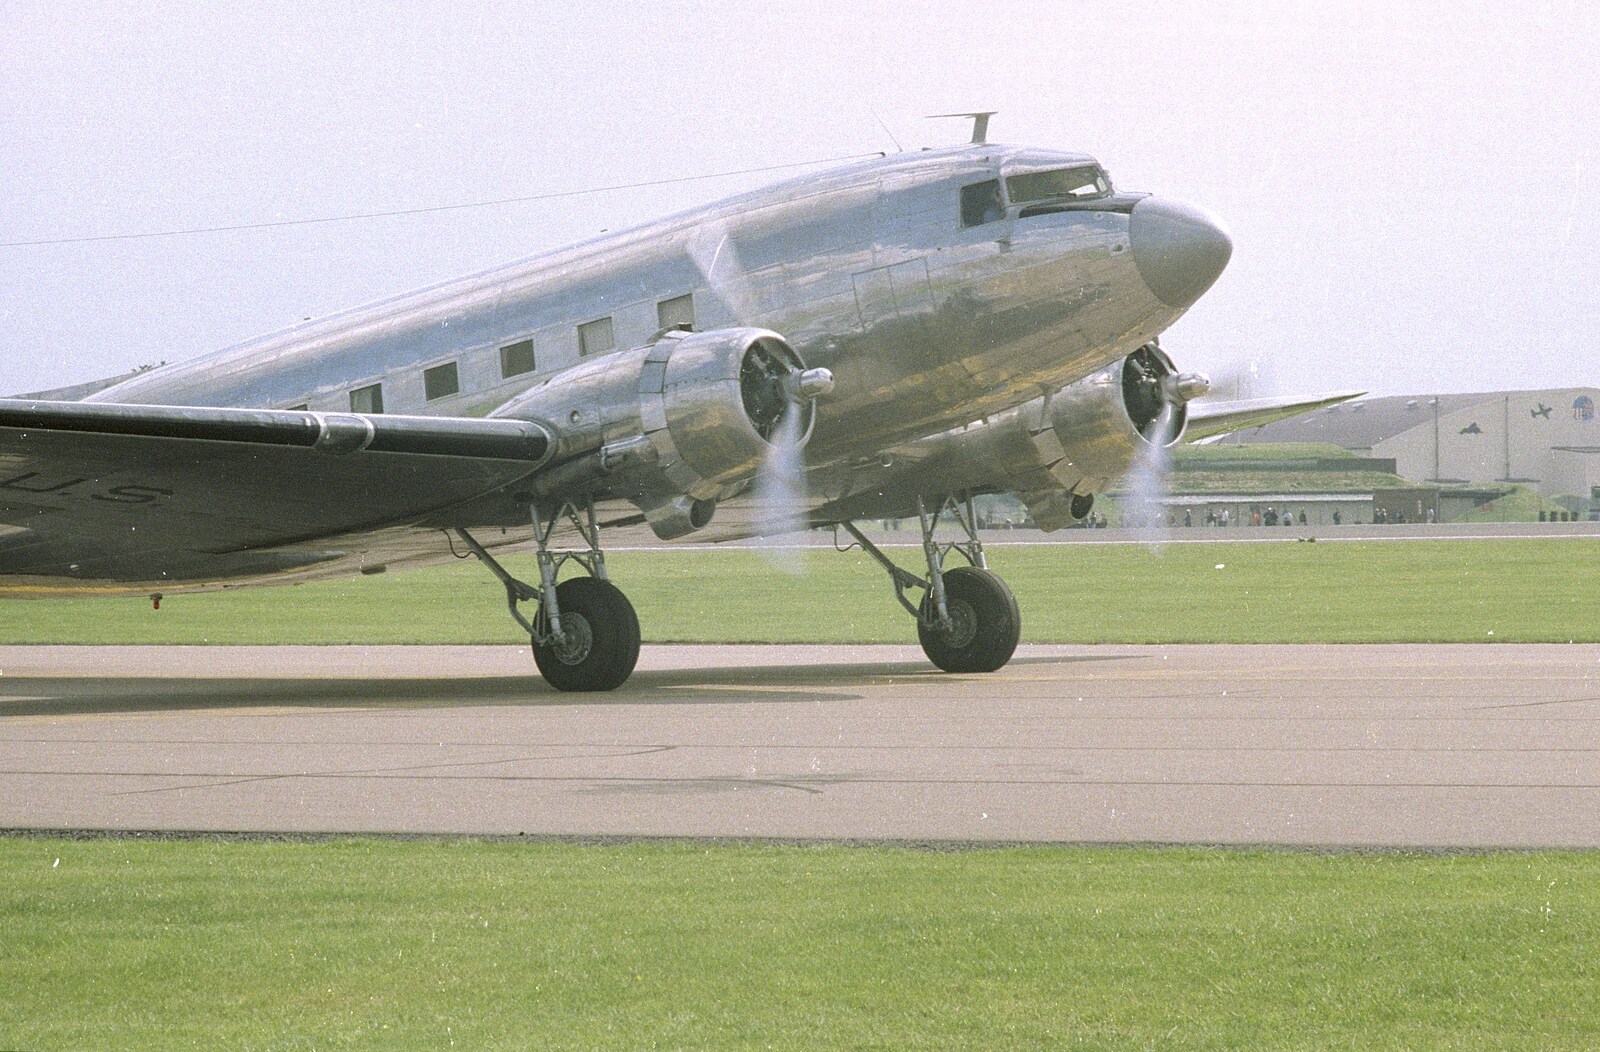 The DC-3 taxis past from The Mildenhall Air Fete, Mildenhall, Suffolk - 29th May 1994